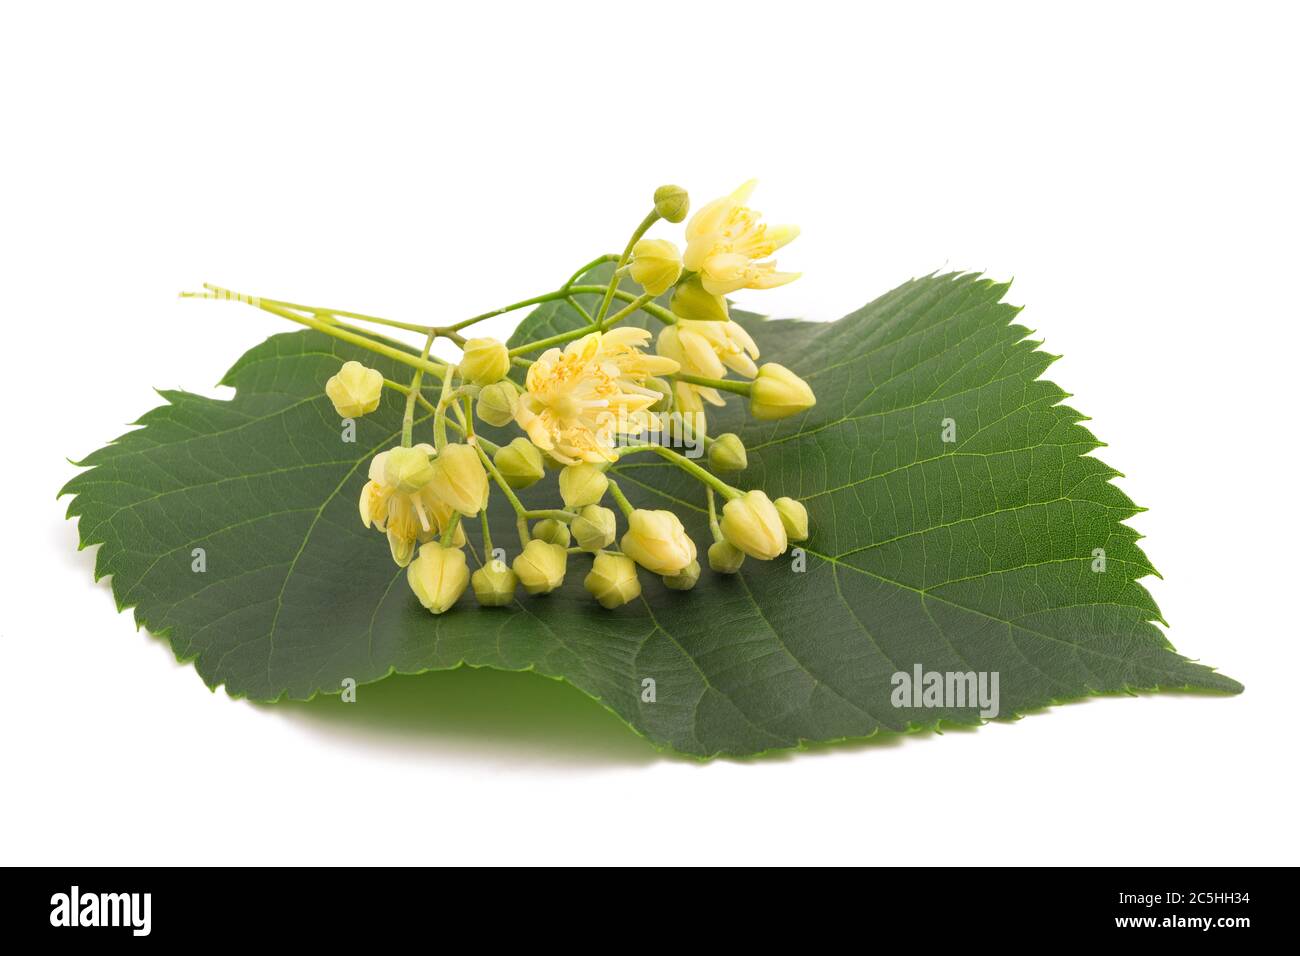 linden leaf with  flowers  isolated on white background Stock Photo